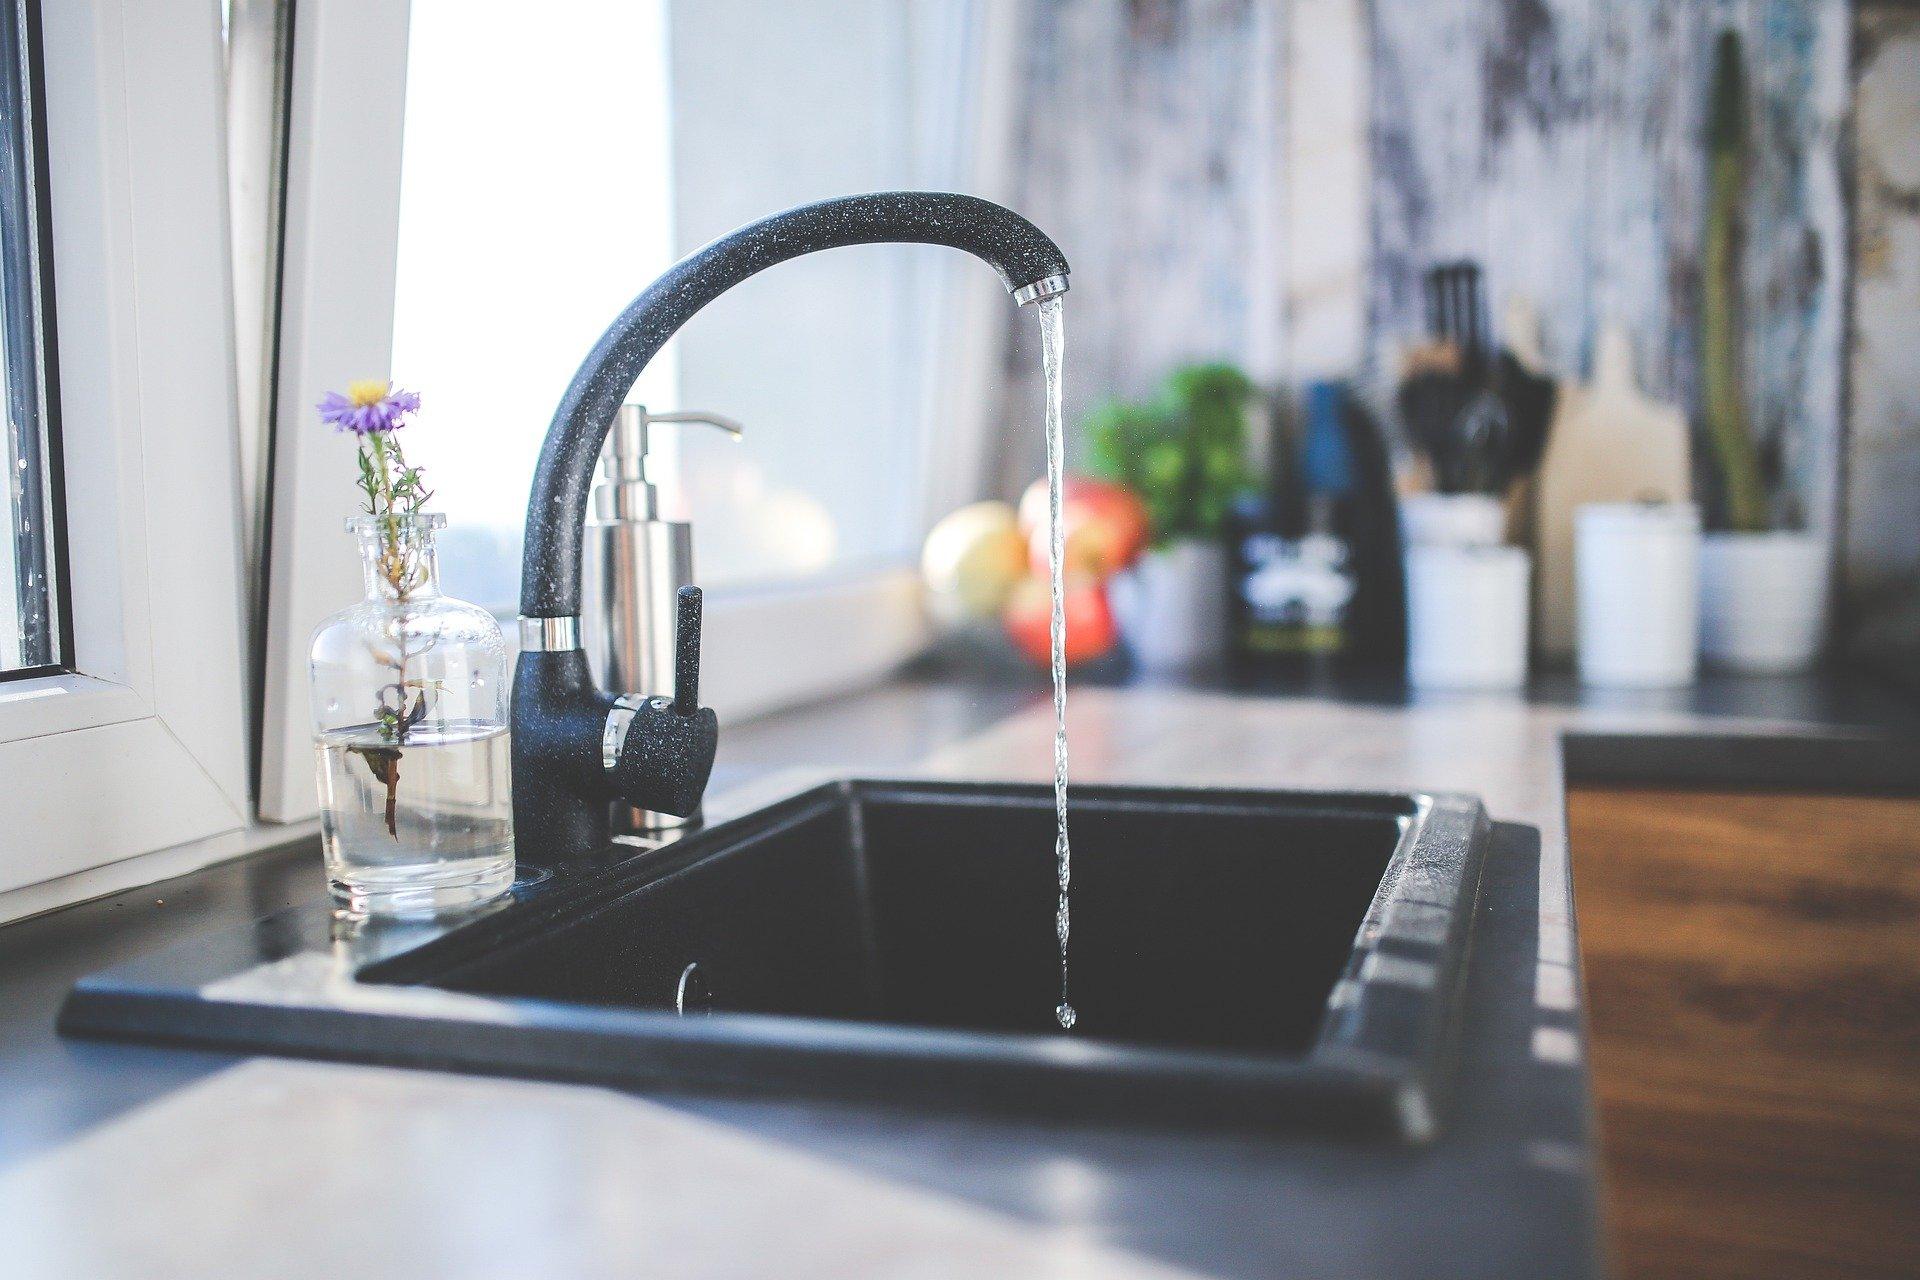 How to Prevent Water Damage Caused by a Clogged Kitchen Sink